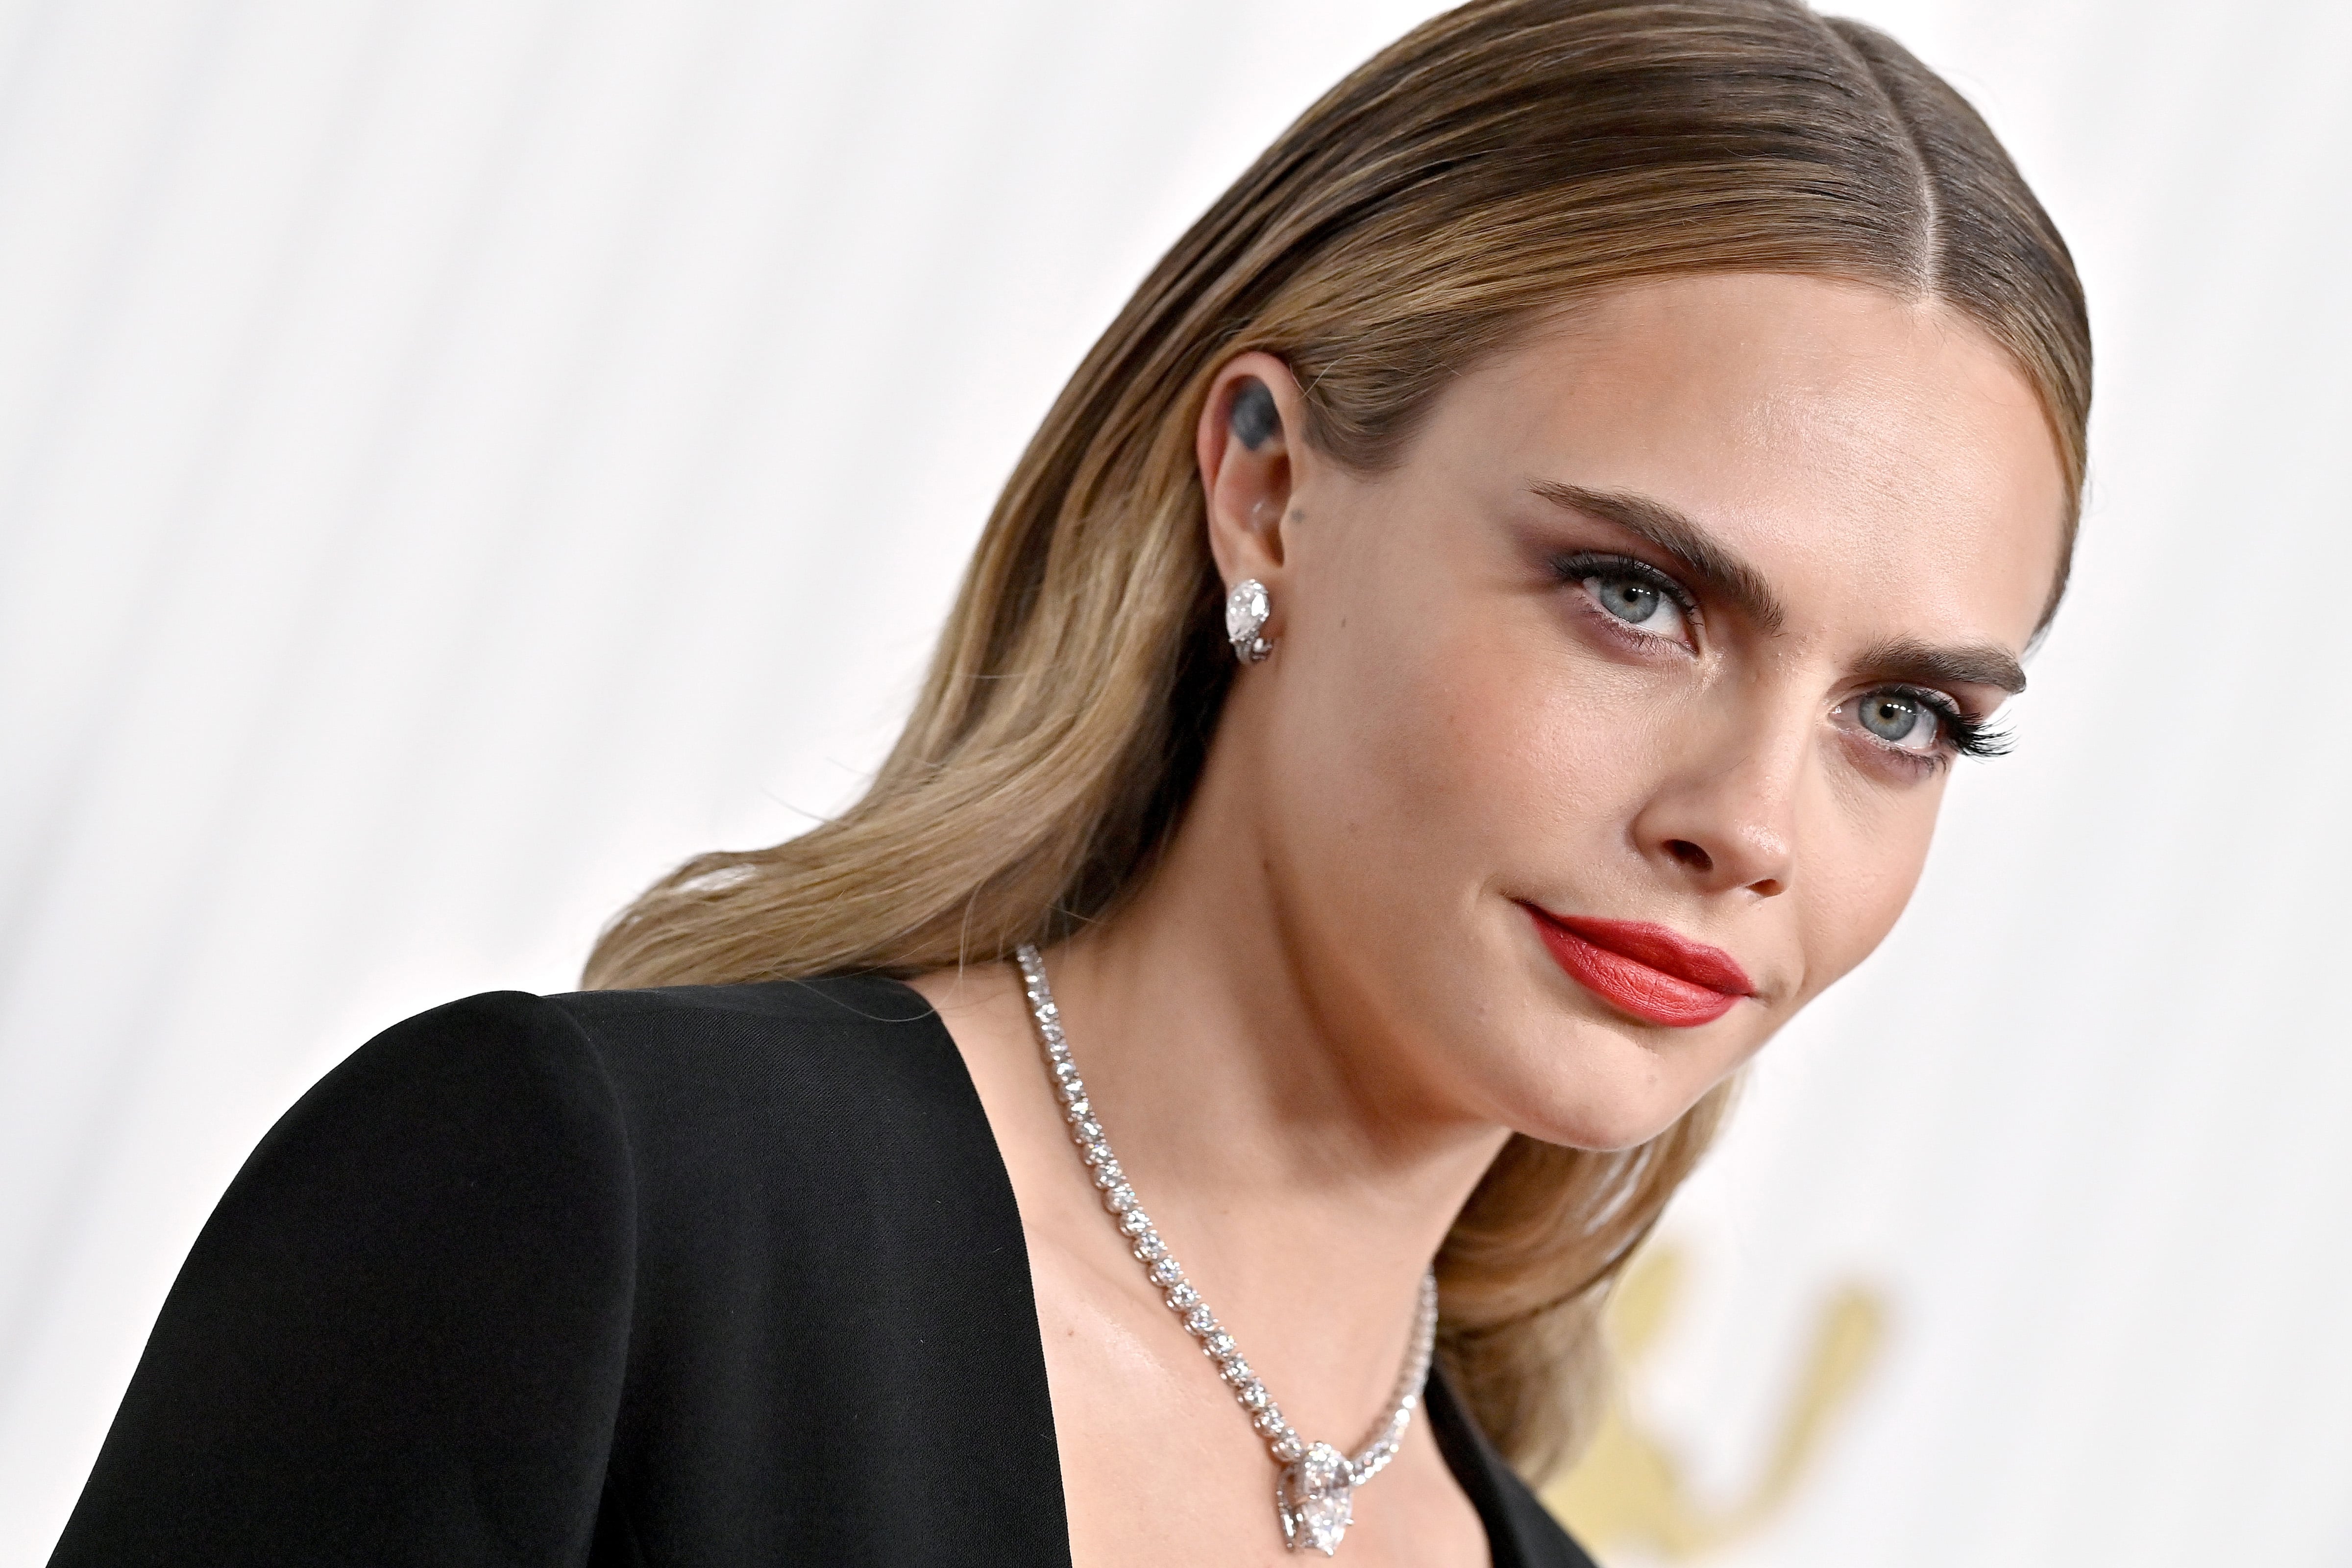 Cara Delevingne Opens Up About Sobriety and Self-Care for Vogue's April  2023 Cover